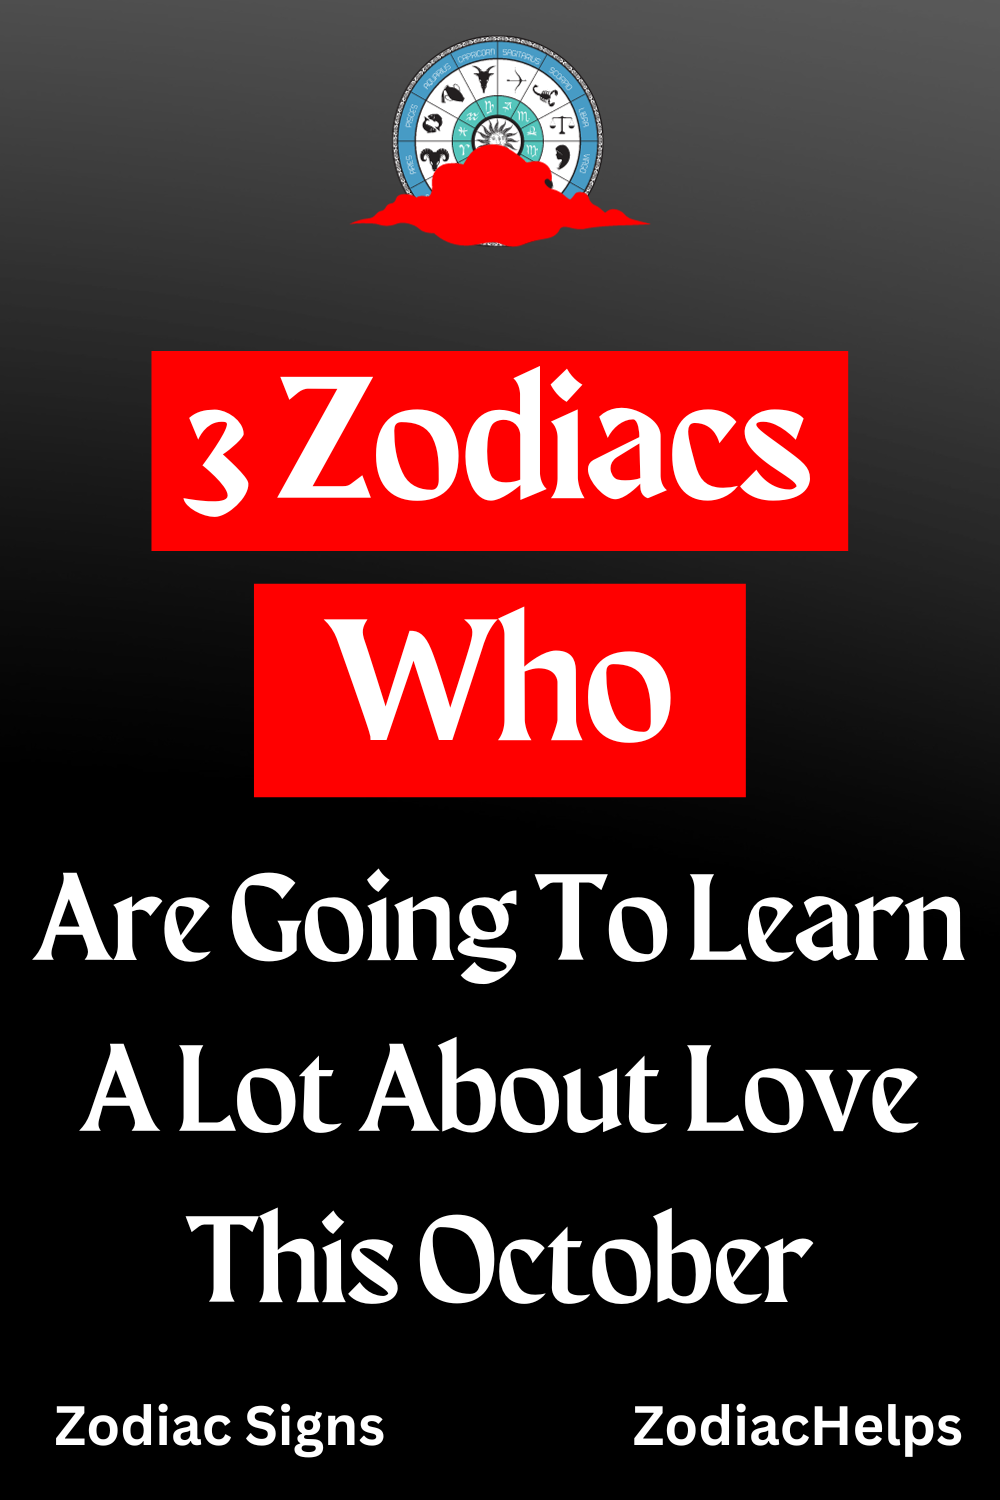 3 Zodiacs Who Are Going To Learn A Lot About Love This October